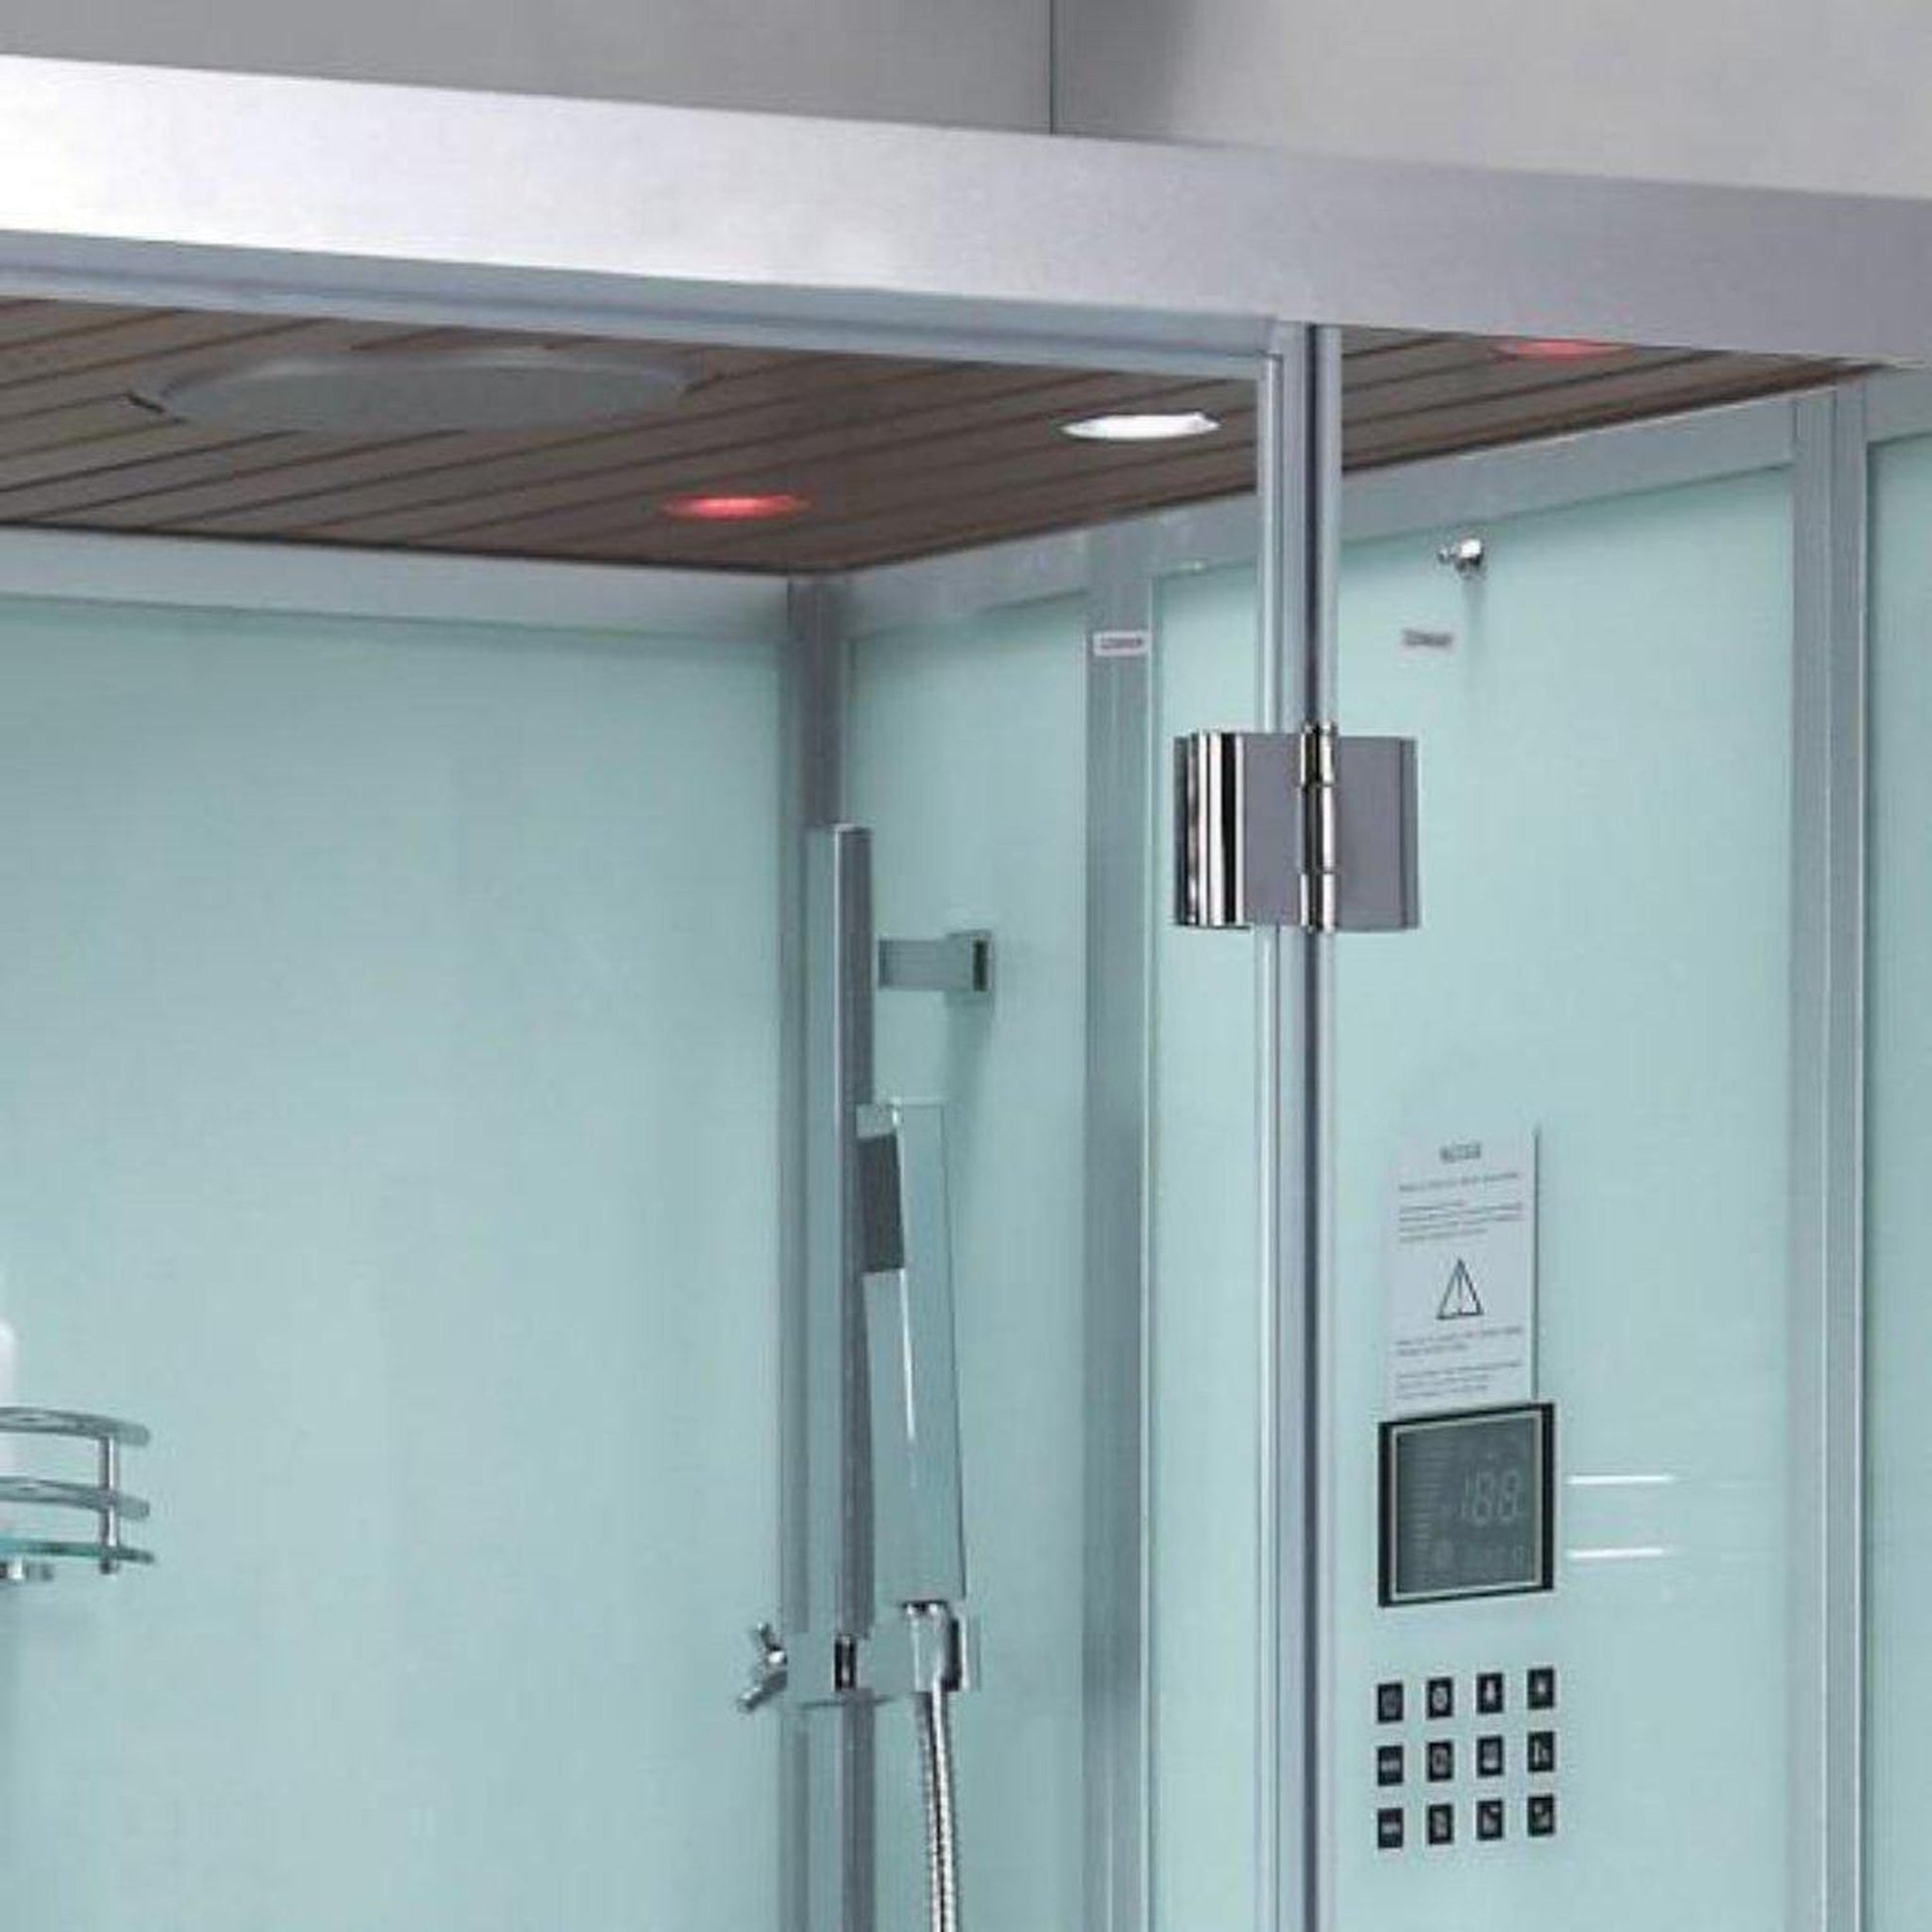 Platinum 39" x 35" x 89" One-Person White Framed Rectangle Walk-In Steam Shower With Right Handed Control Panel Configuration Hinged Door 6 Massage Jets & LED Chromatherapy Lighting